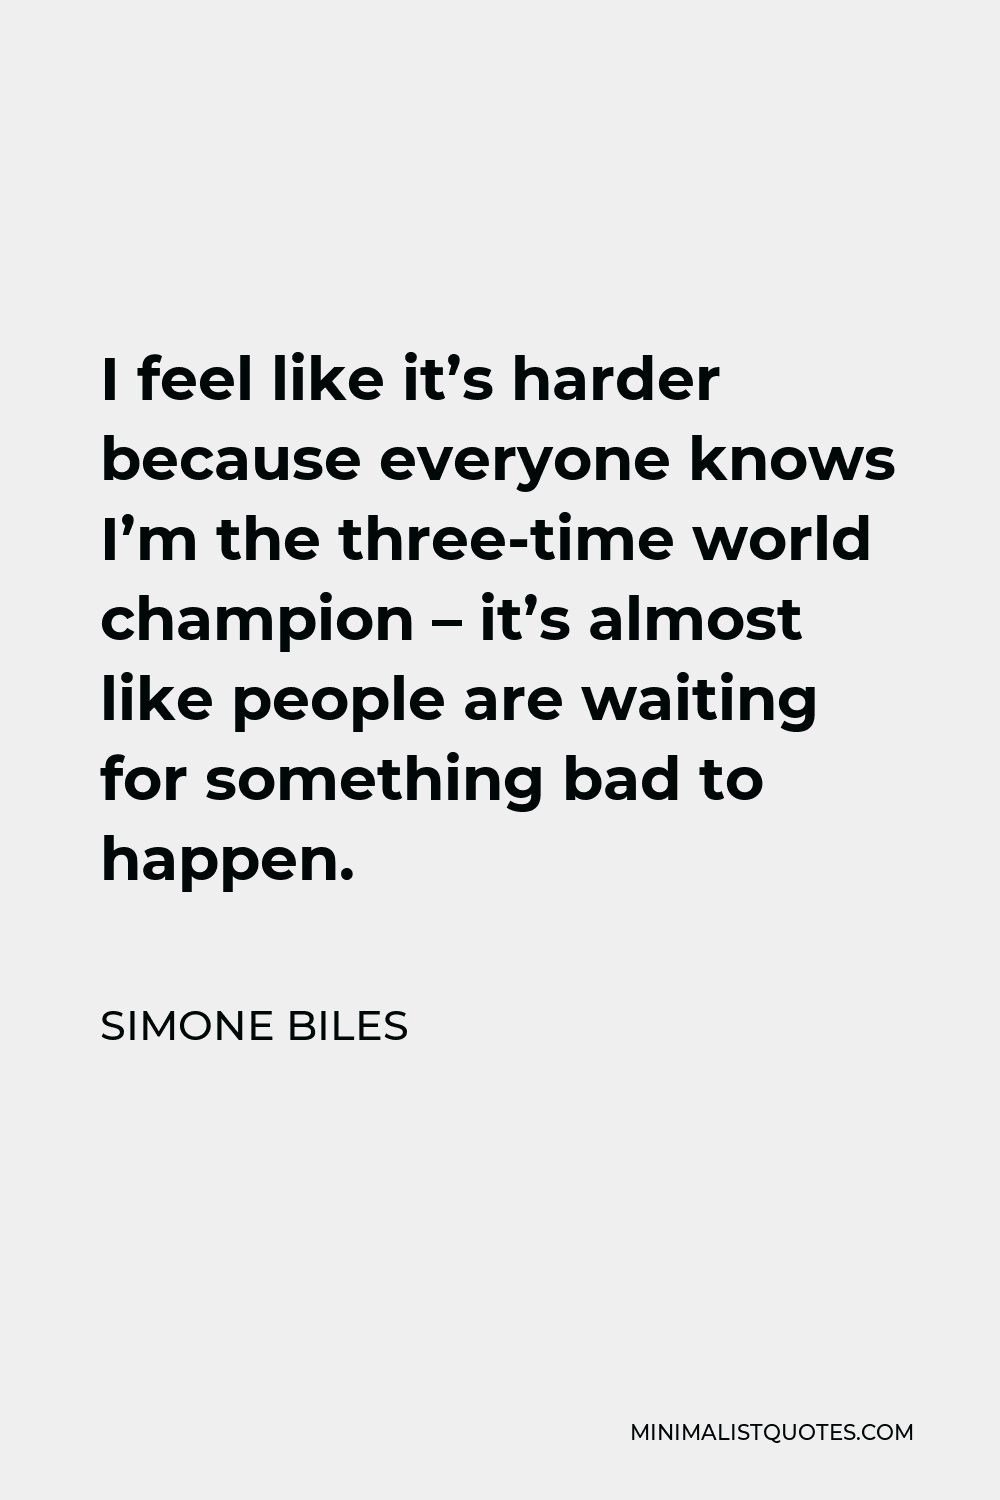 Simone Biles Quote - I feel like it’s harder because everyone knows I’m the three-time world champion – it’s almost like people are waiting for something bad to happen.